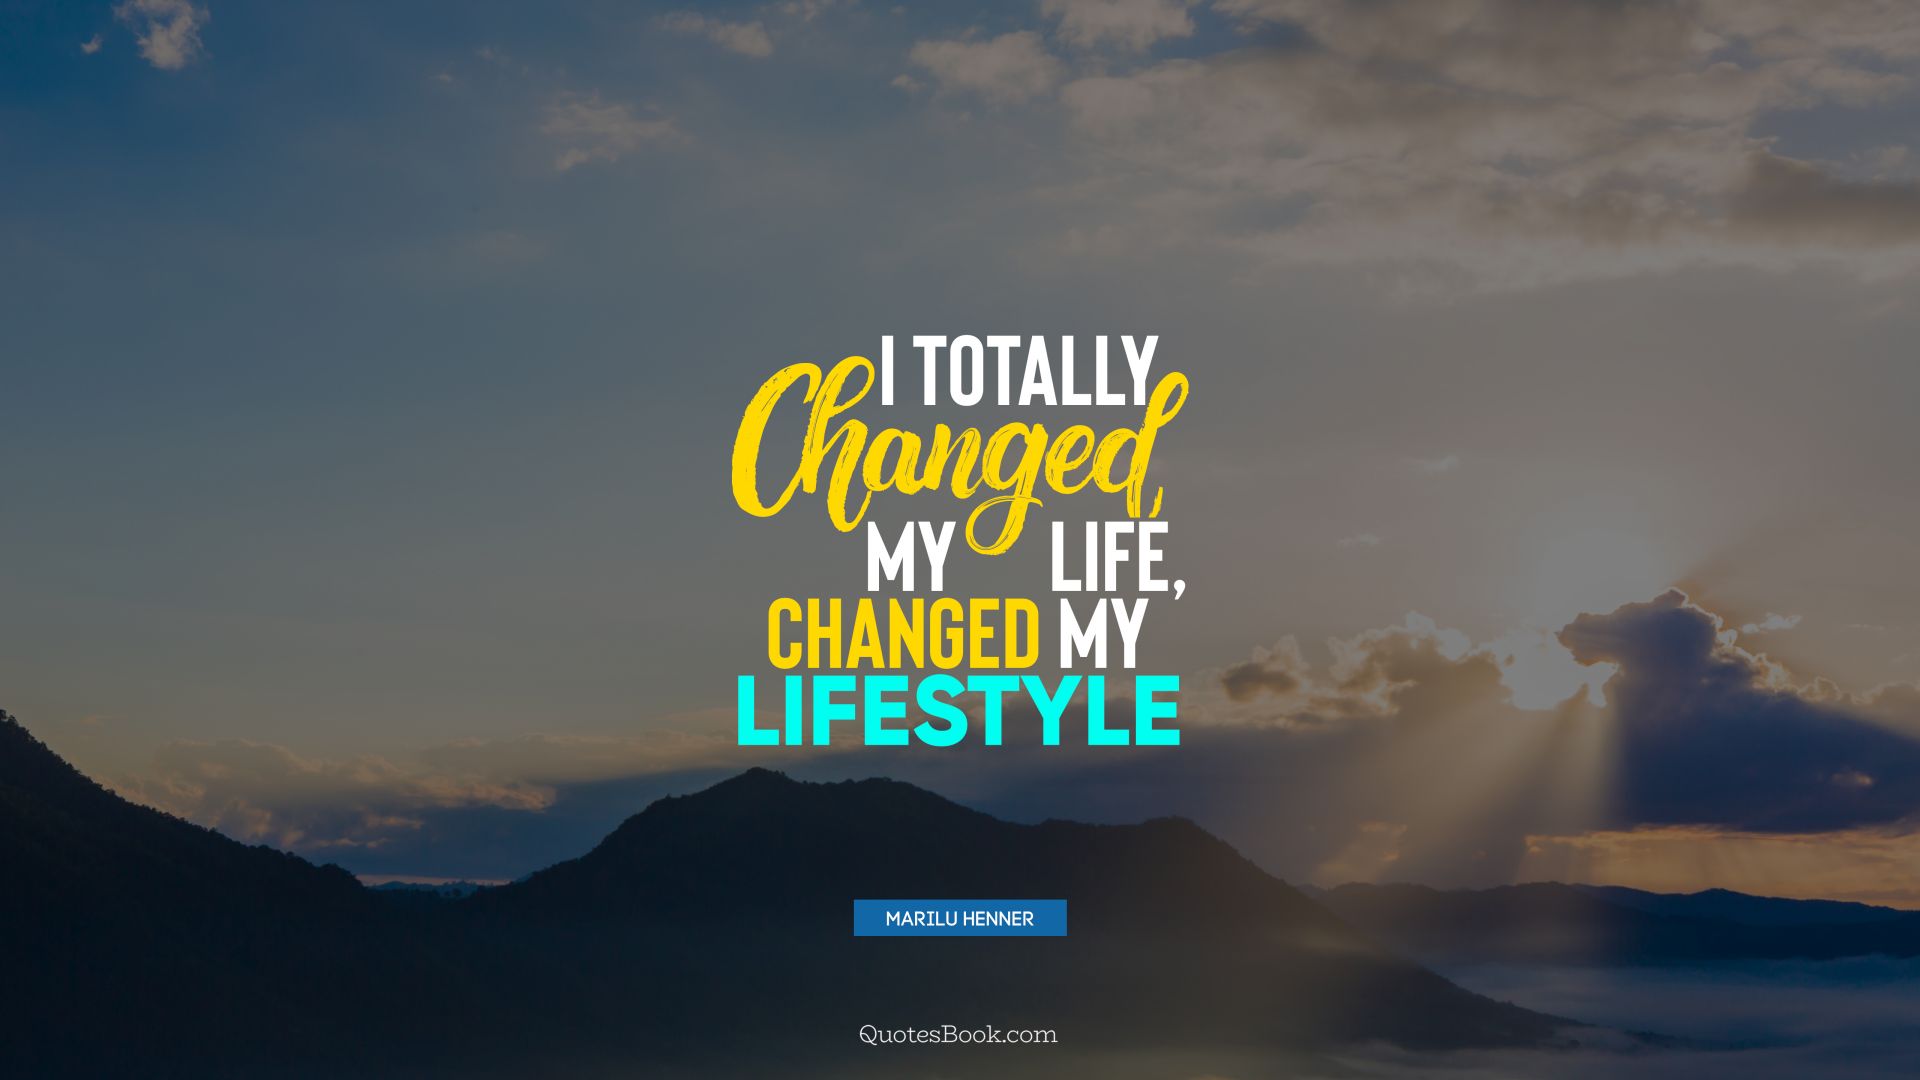 I totally changed my life, changed my lifestyle. - Quote by Marilu Henner